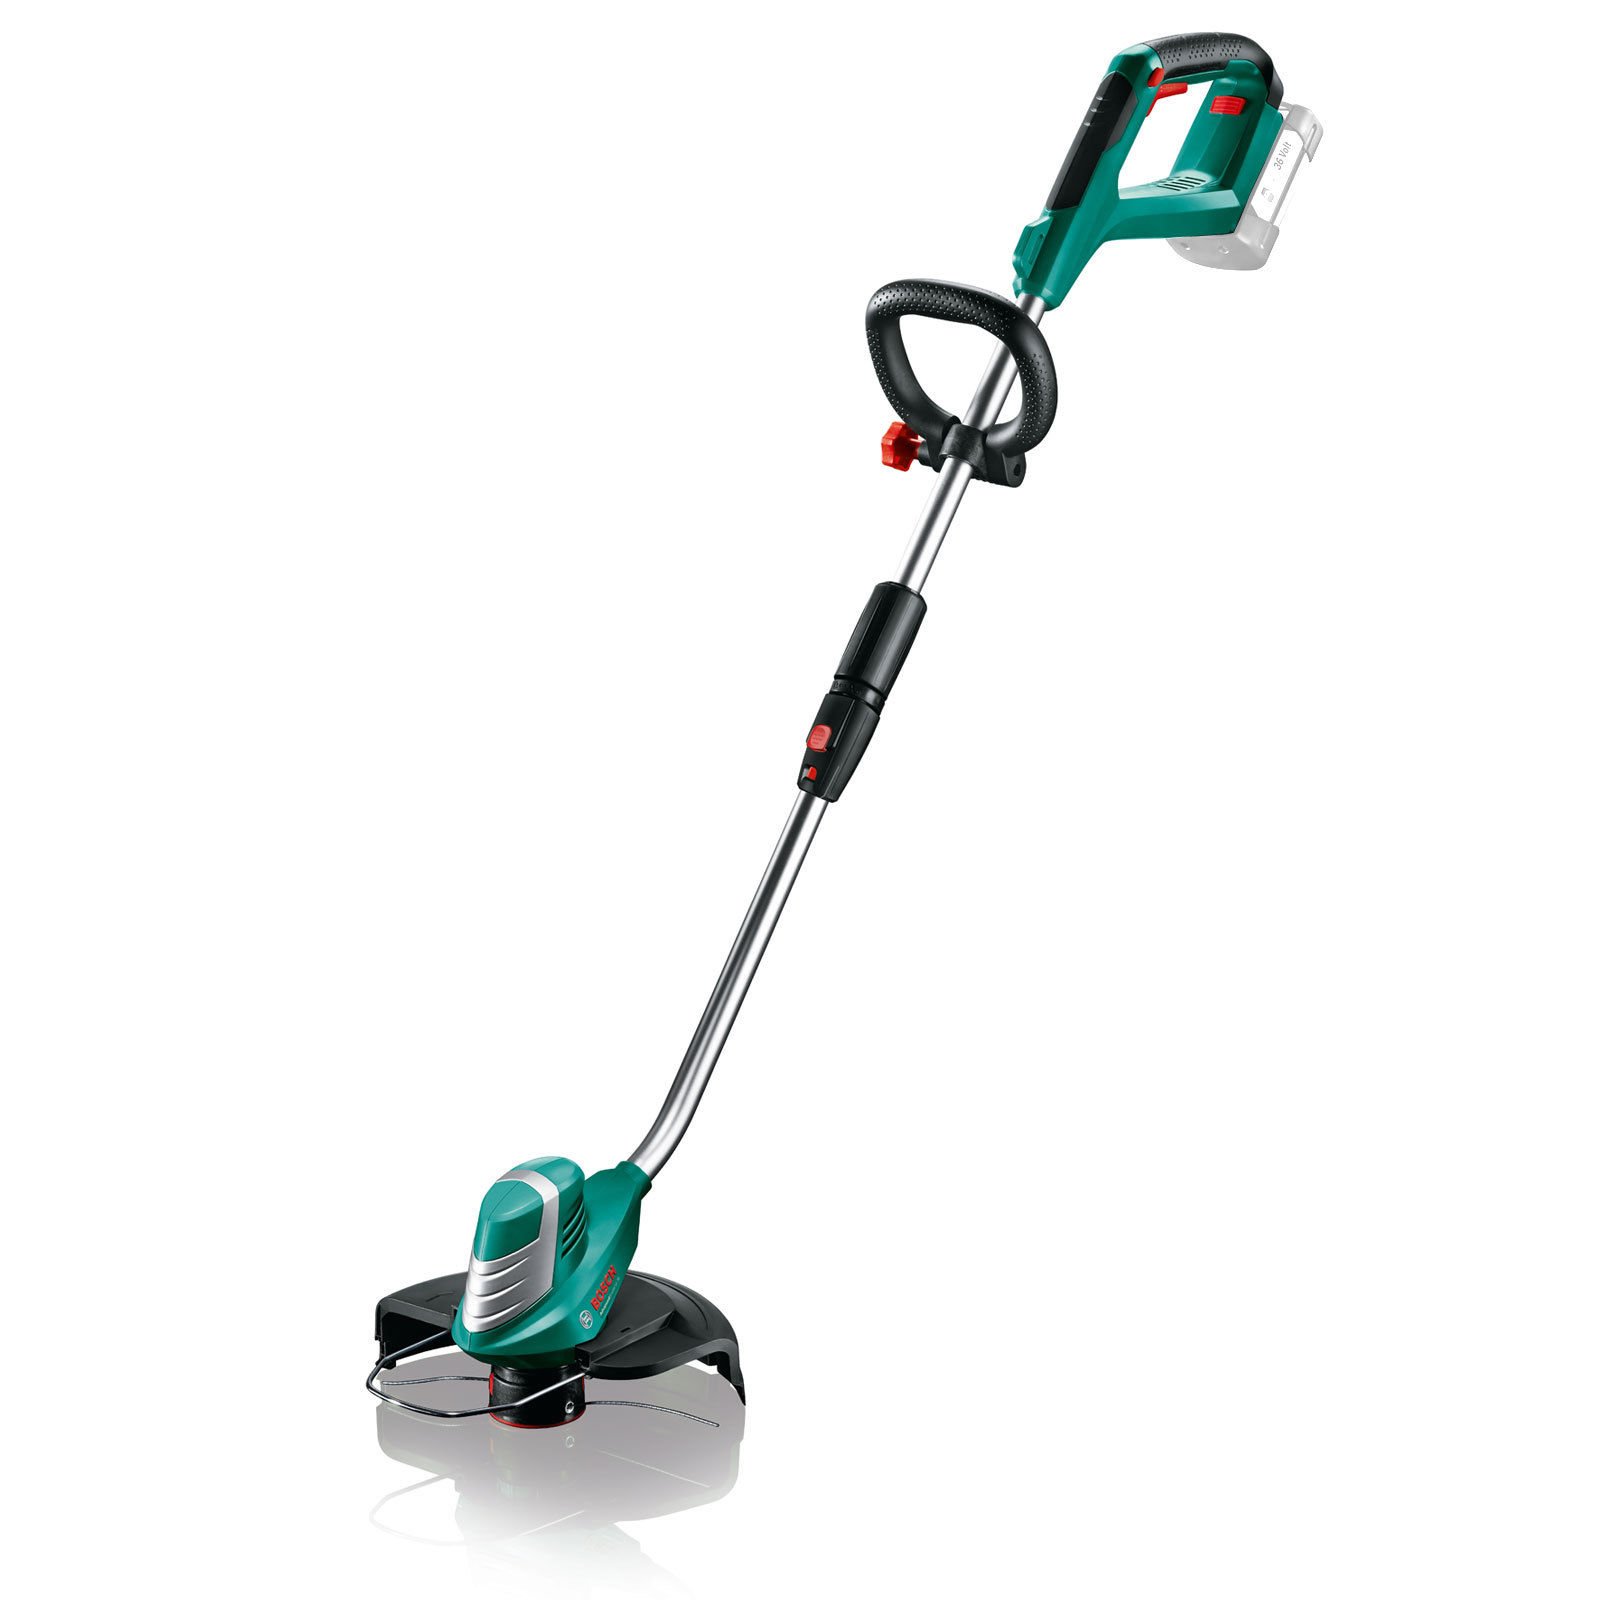 Bosch - AdvancedGrassCut 36 Grass Trimmer 36V Solo (Without Battery+Charger)